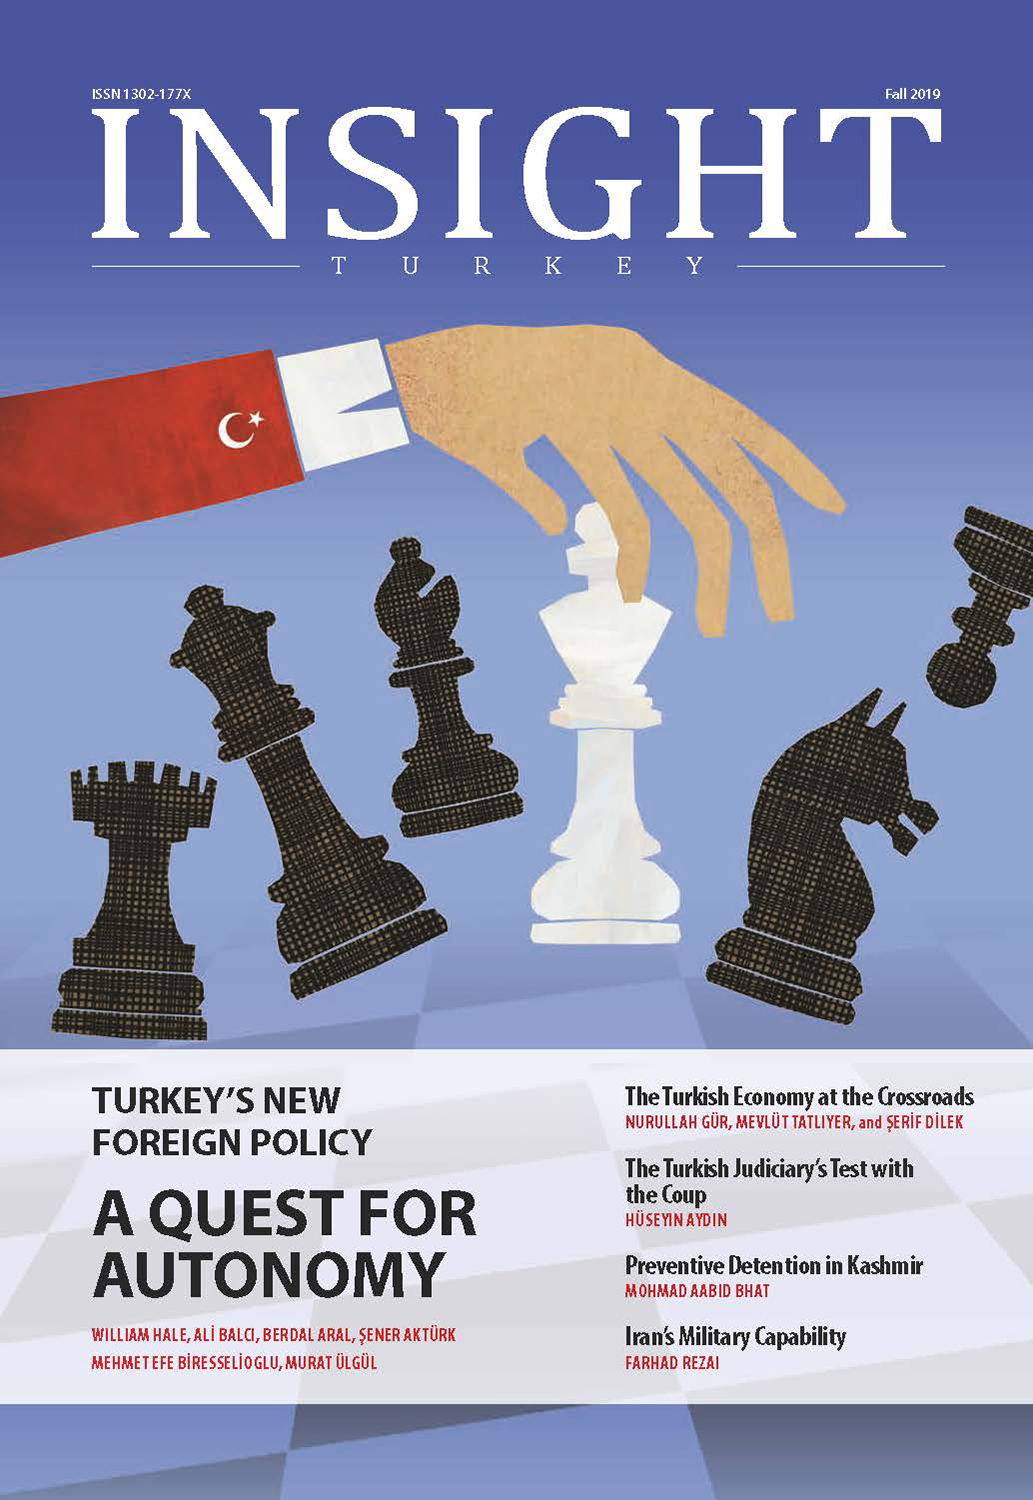 Insight Turkey > Issues | Turkey's New Foreign Policy: A Quest for Autonomy - Winter 2019 / Volume 21 Number 4